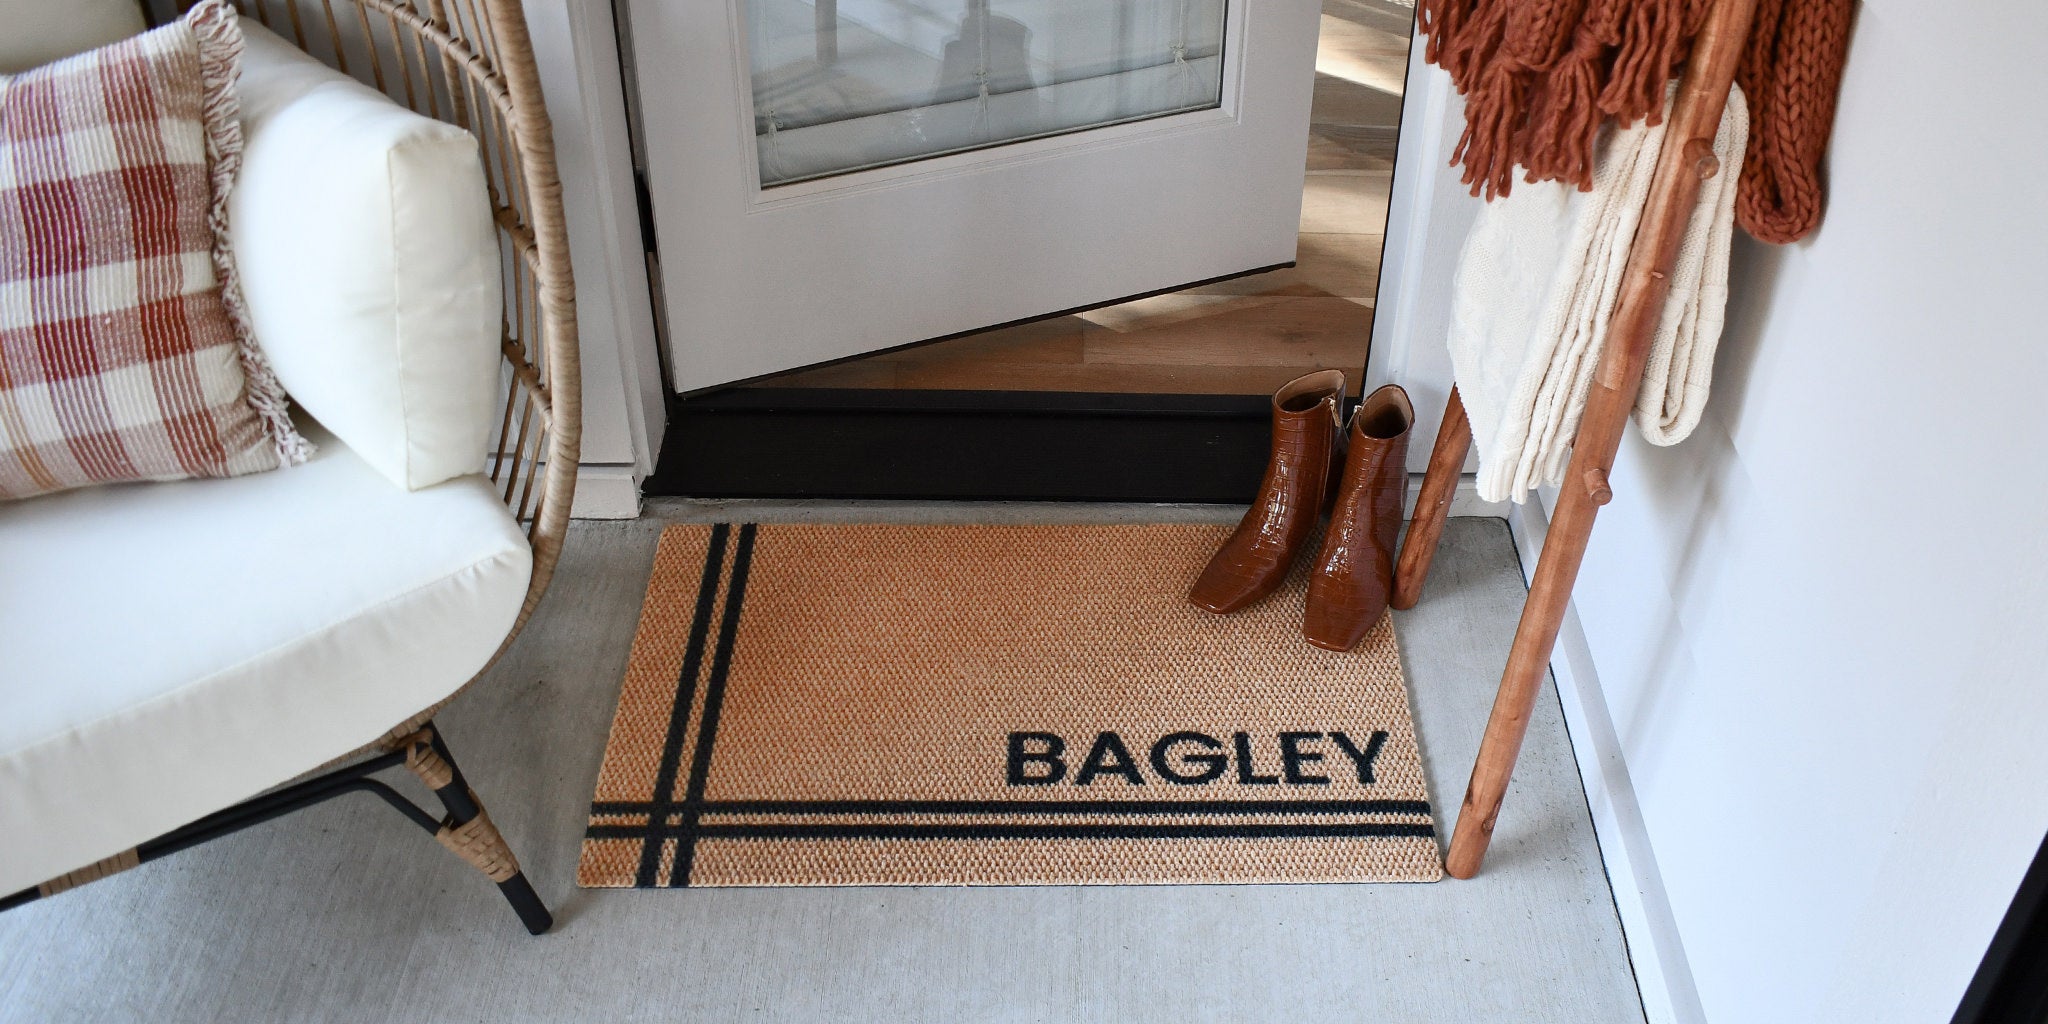 Matterly Hashtag Personalized decorative doormat is durable, long lasting door mat that will not shed or rot.